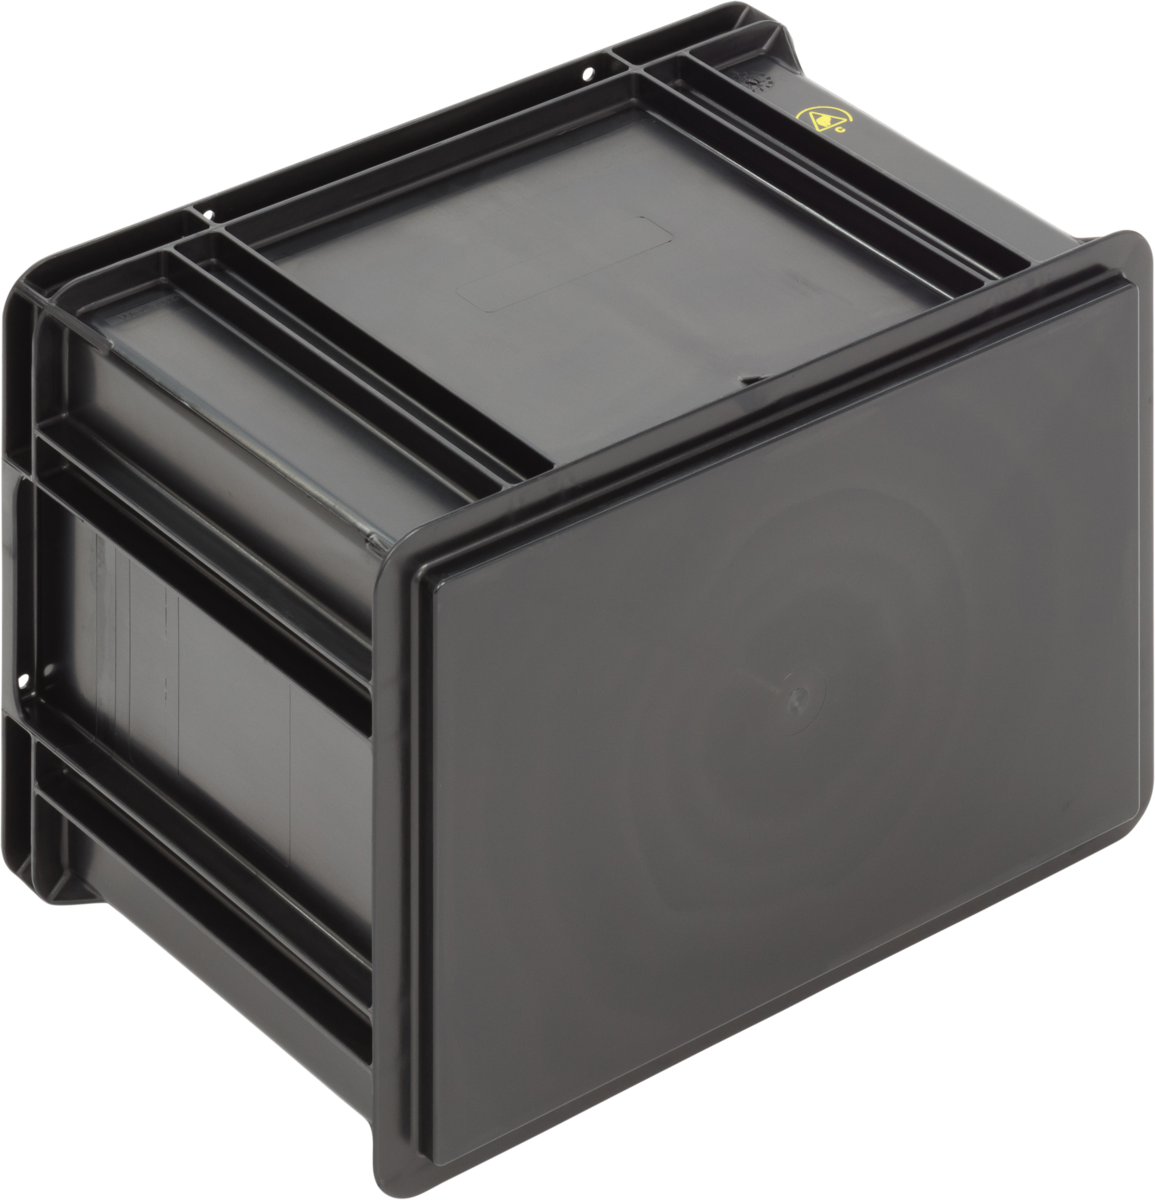 ESD-Safe-SGL-Norm-Stacking-Bin-Containers-Flat-Base-Ref.-4326.007.992_1004402_400x300x278_02